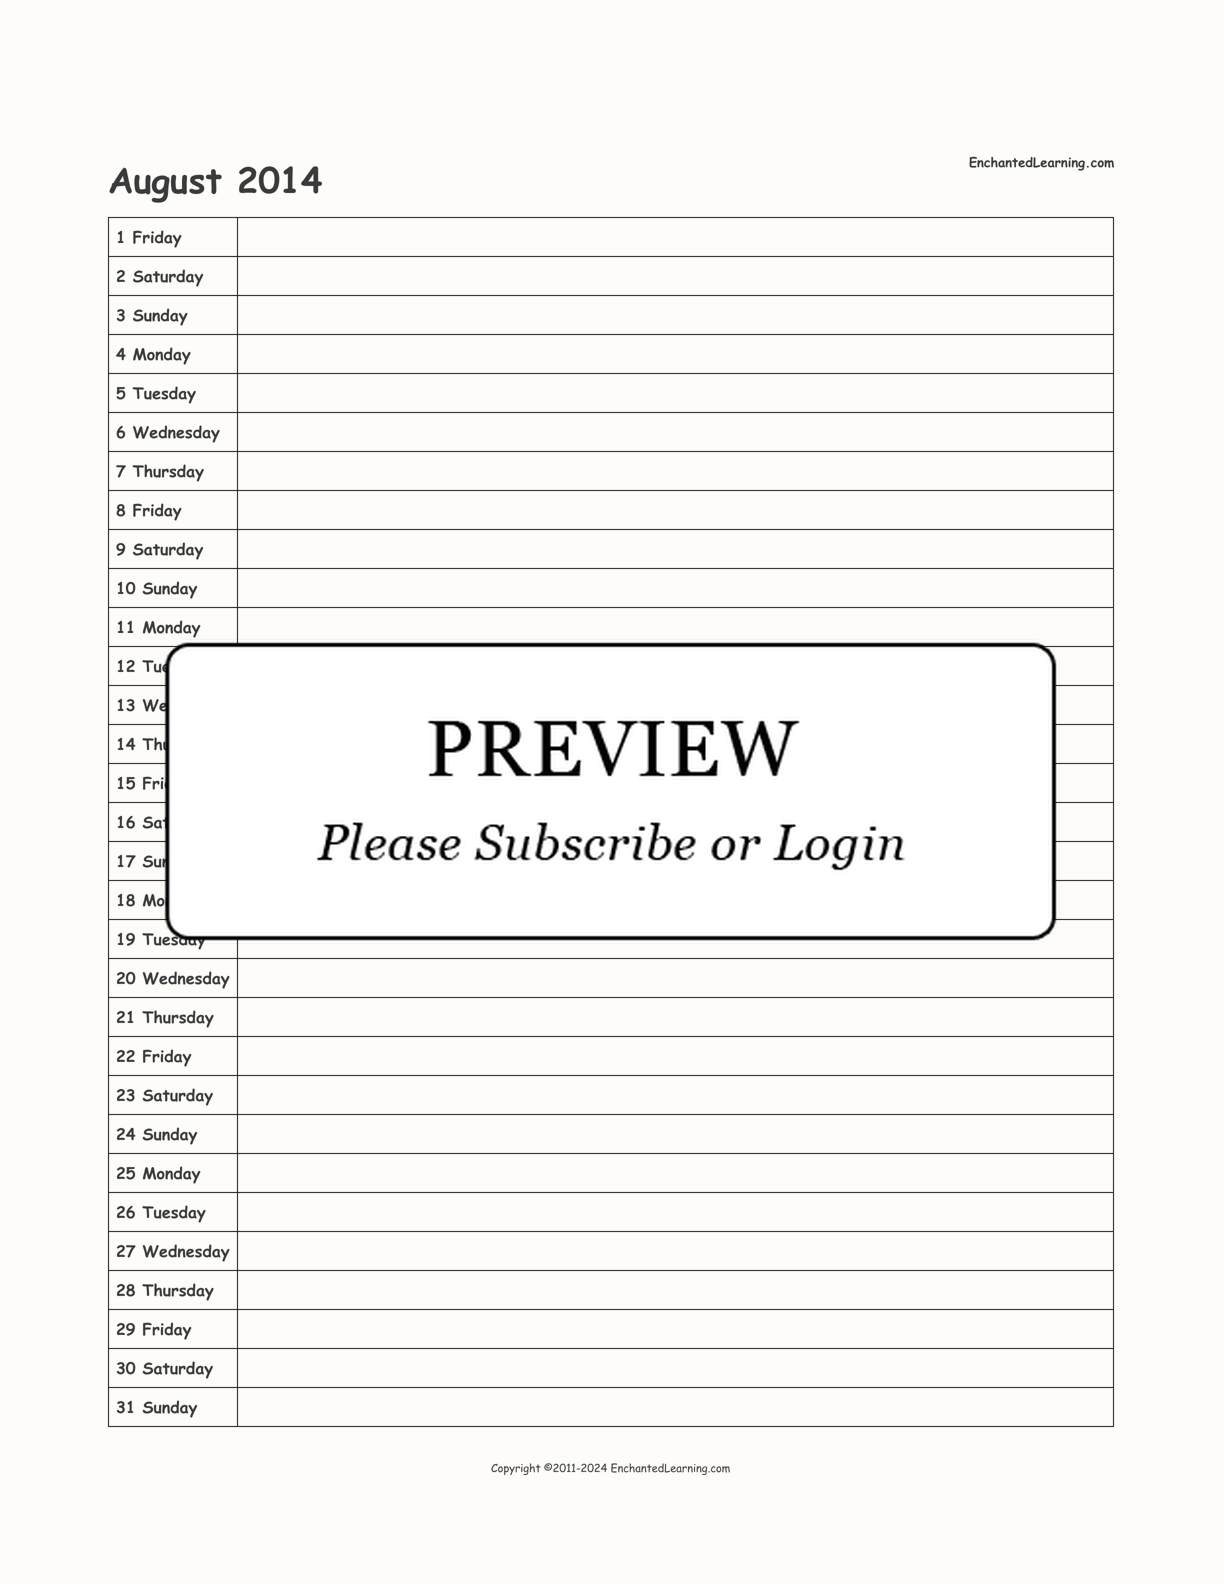 2014 Scheduling Calendar interactive printout page 8